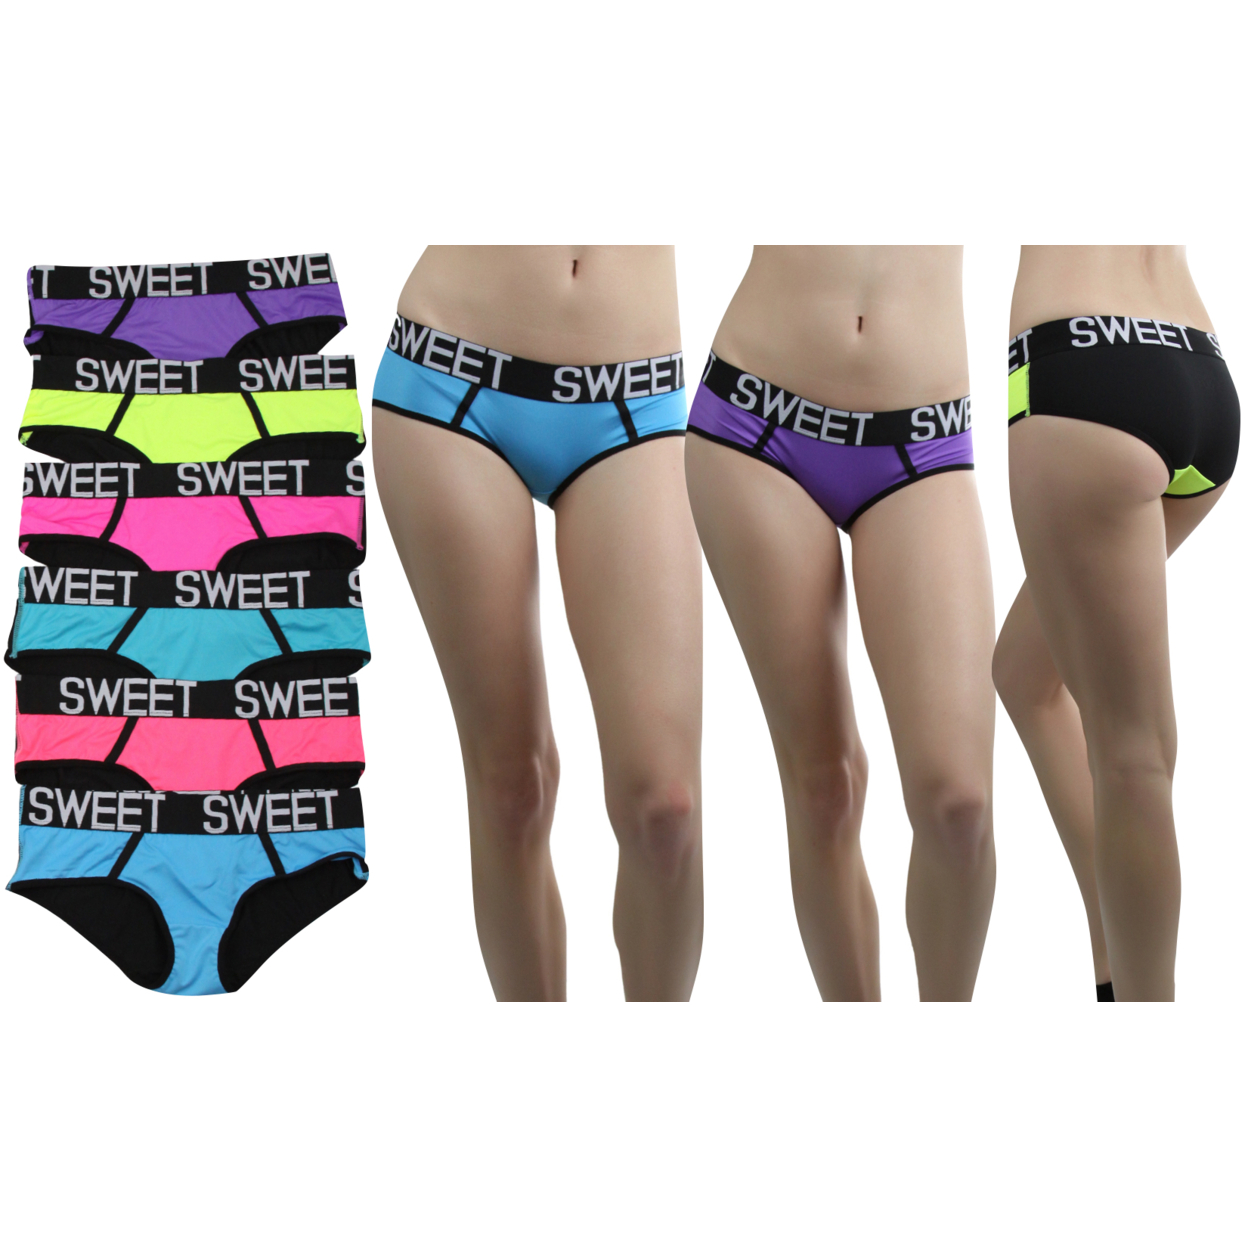 5-Pack Of Sports Bras Or 6-Pack Of Athletic Briefs - Sweet Waistband - S/M, Briefs